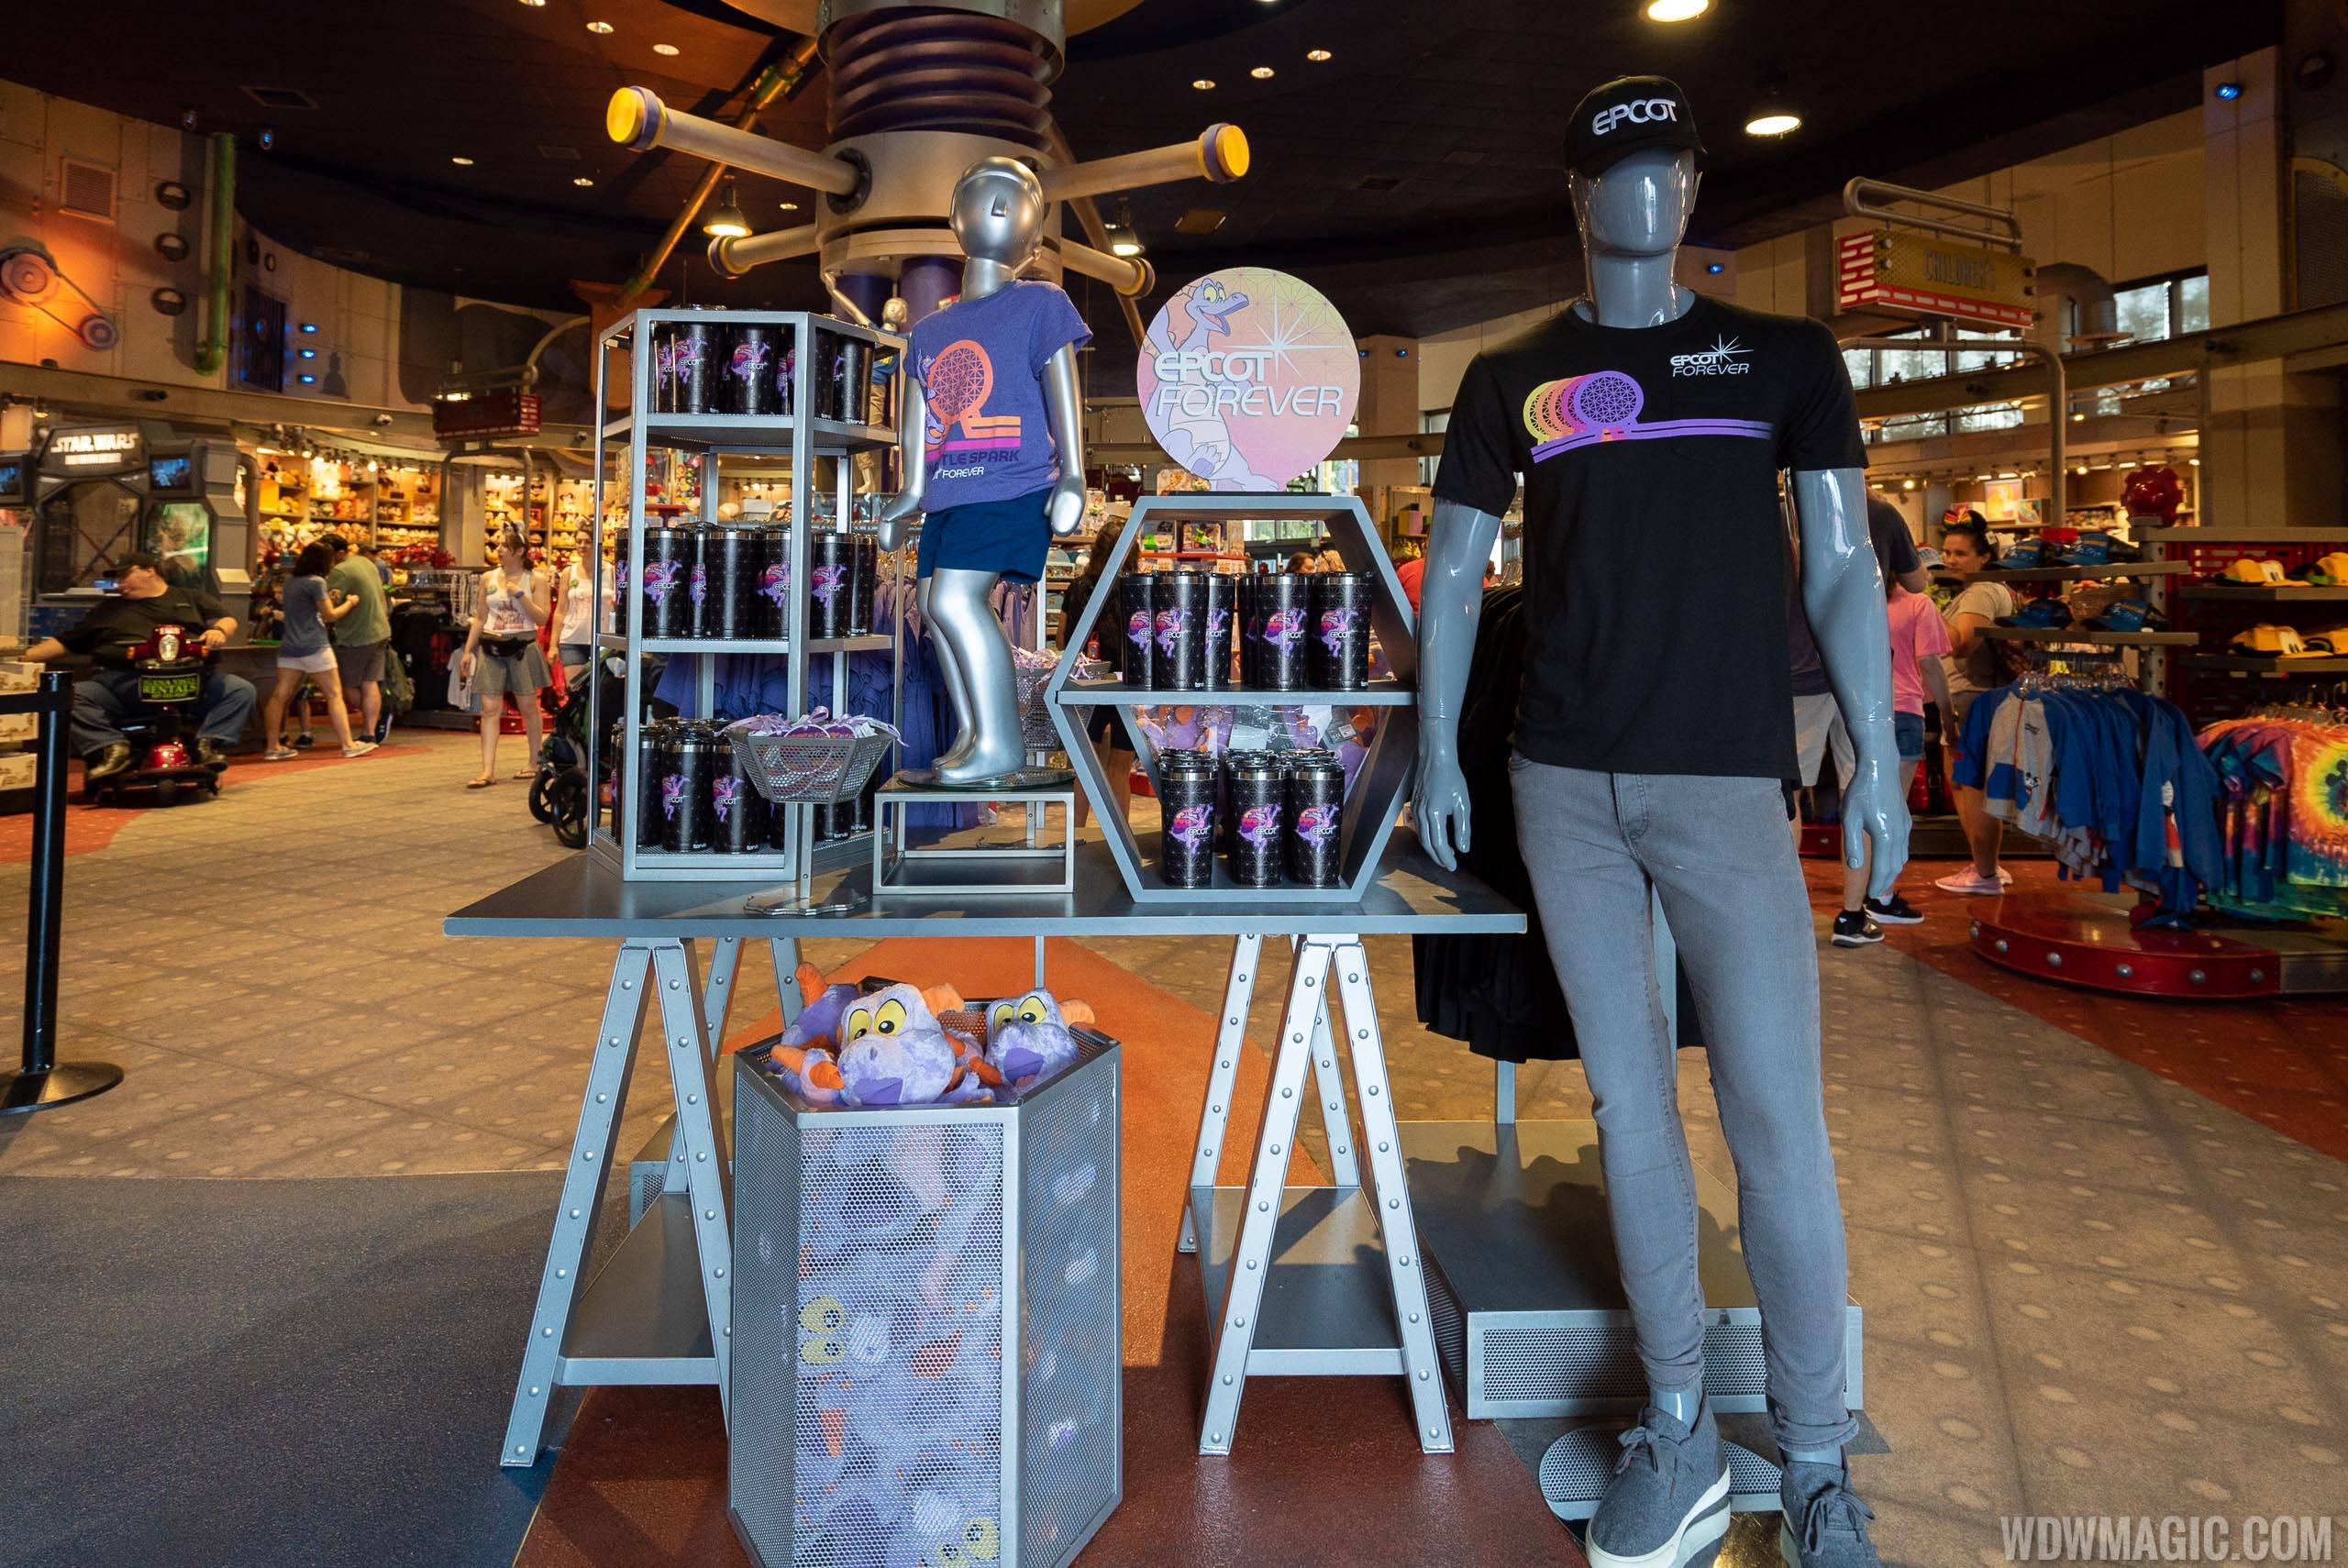 PHOTOS - New Epcot and Epcot Forever merchandise now at Mouse Gear